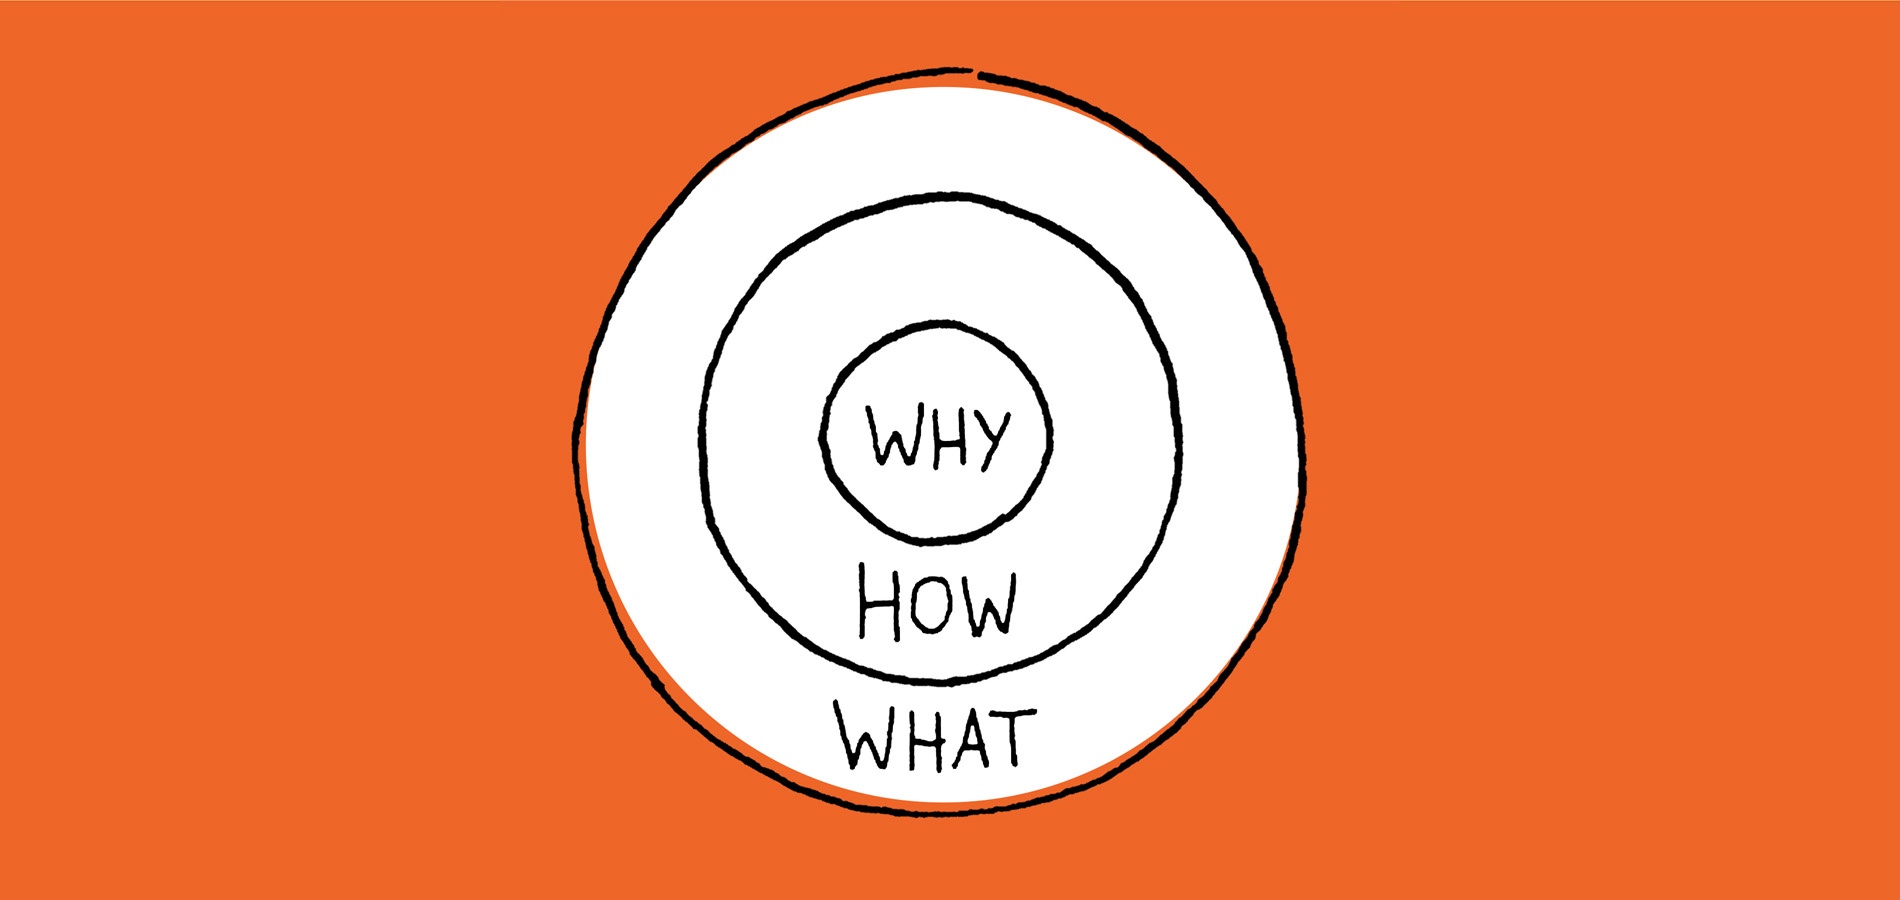 Start With Why to Find Your Organization’s Purpose